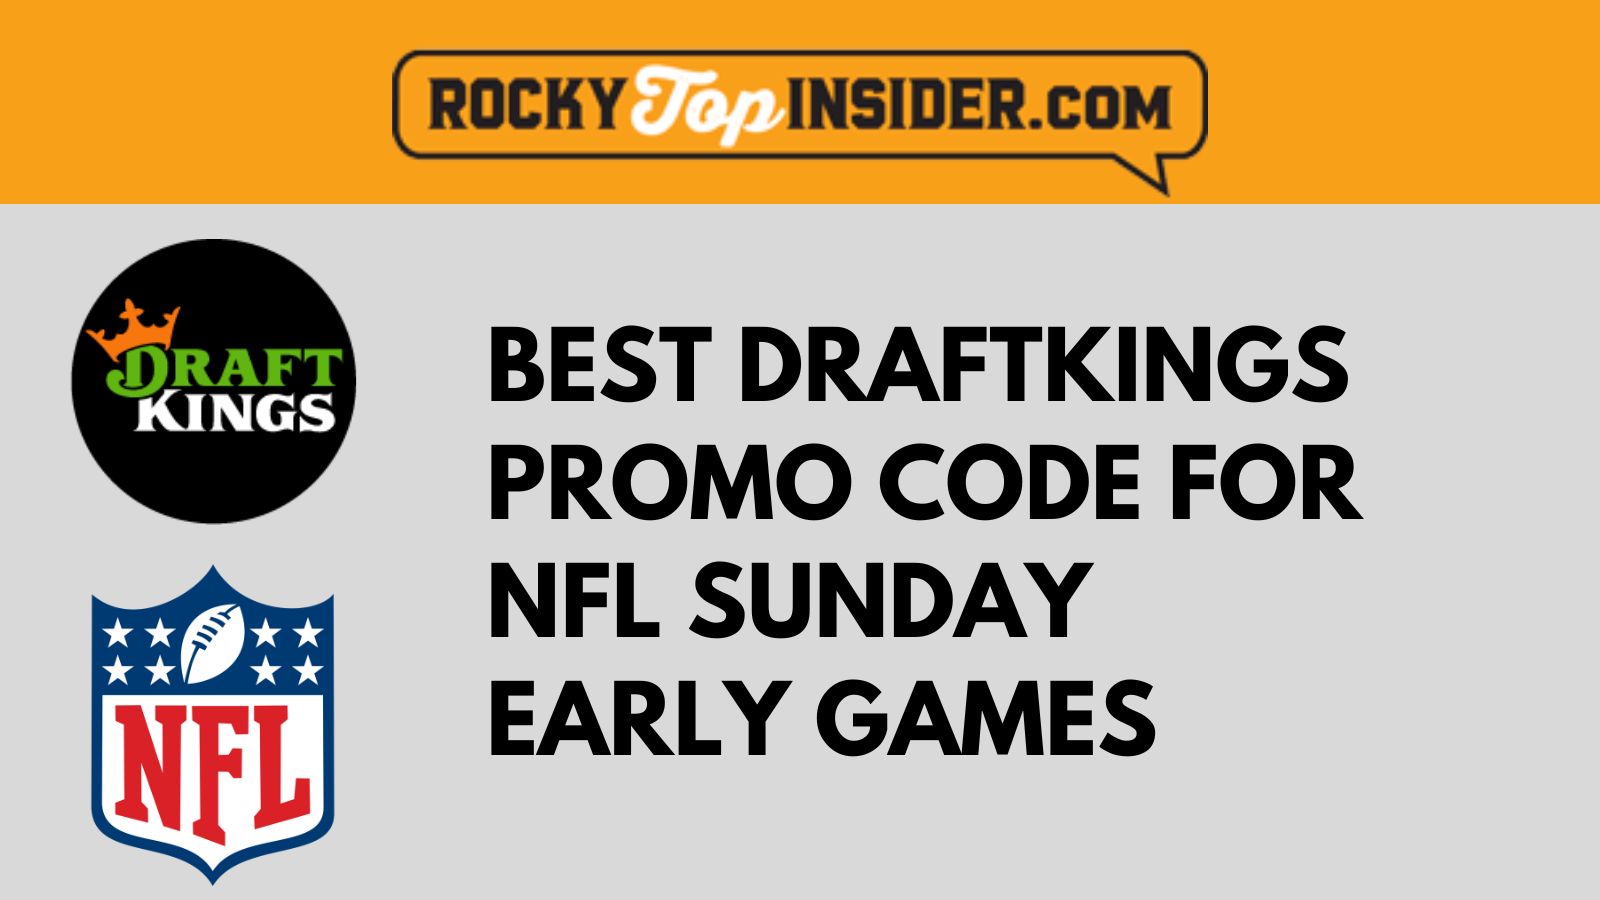 Best DraftKings Promo Code for NFL Sunday Early Games